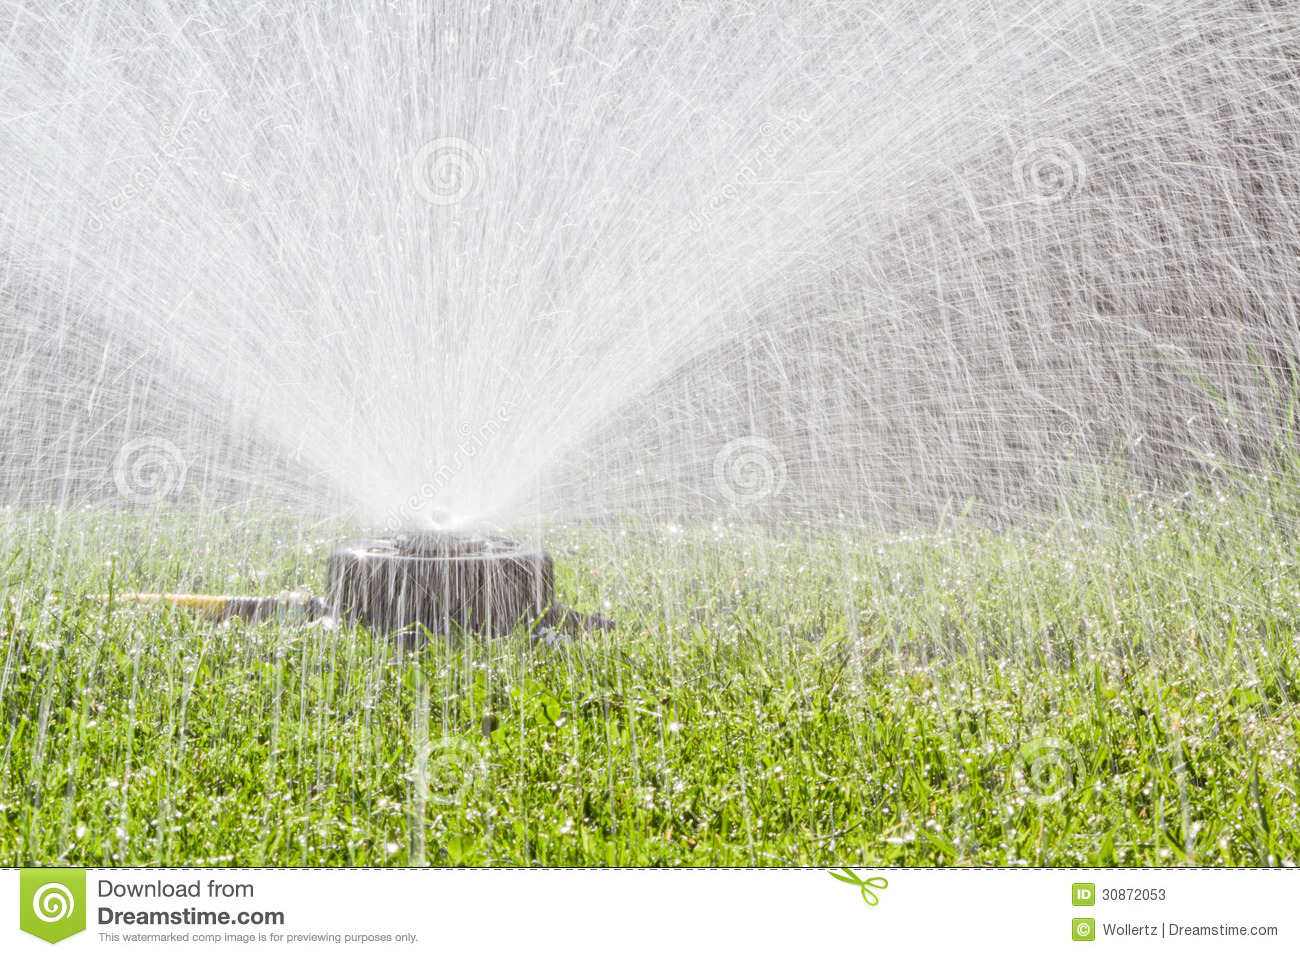 Watering The Grass In The Back Yard With A Yellow Hose And A Spray